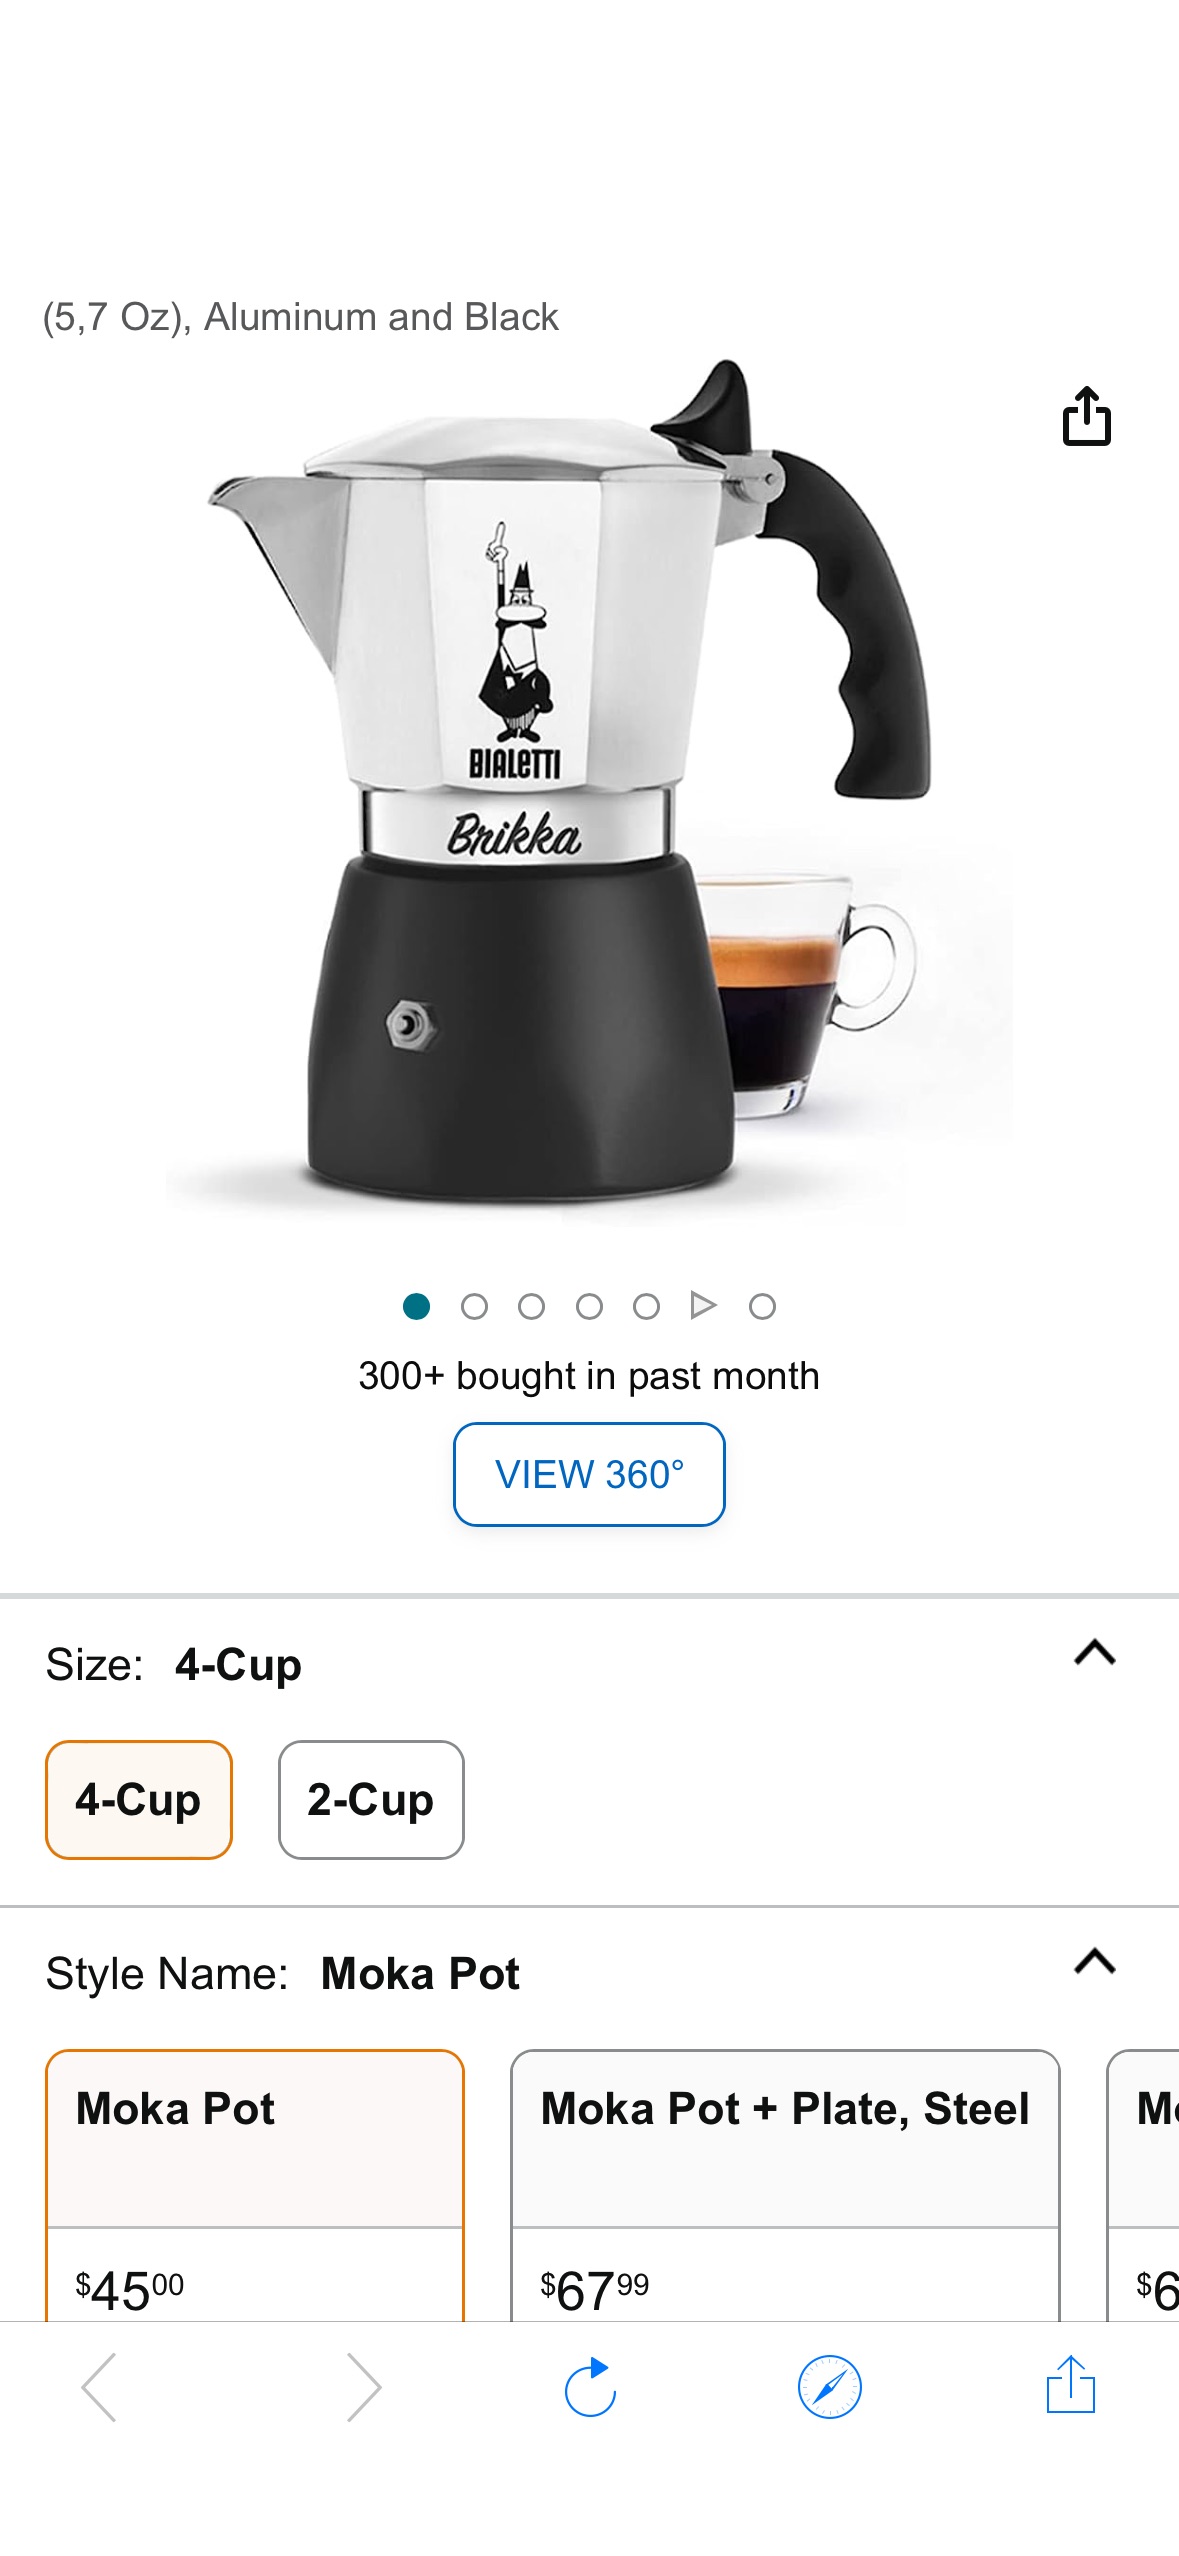 Amazon.com: Bialetti - New Brikka, Moka Pot, the Only Stovetop Coffee Maker Capable of Producing a Crema-Rich Espresso, 4 Cups (5,7 Oz), Aluminum and Black:新款摩卡壶